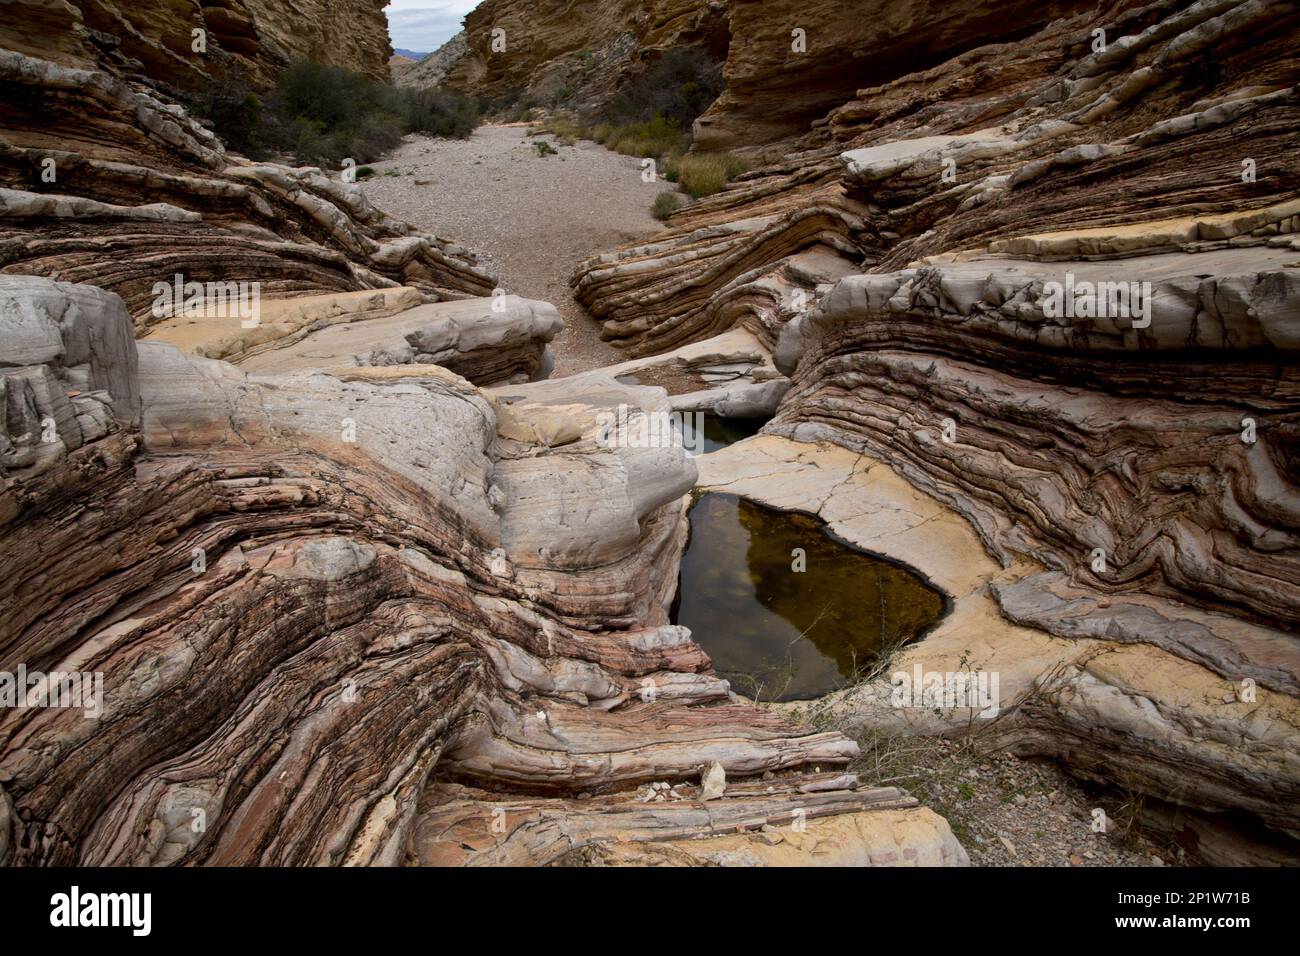 Rock strata and canyon with water in eroded depression on bedrock, Ernst Tinaja, Big Bend N.P., Chihuahuan Desert, Texas, U.S.A. Stock Photo